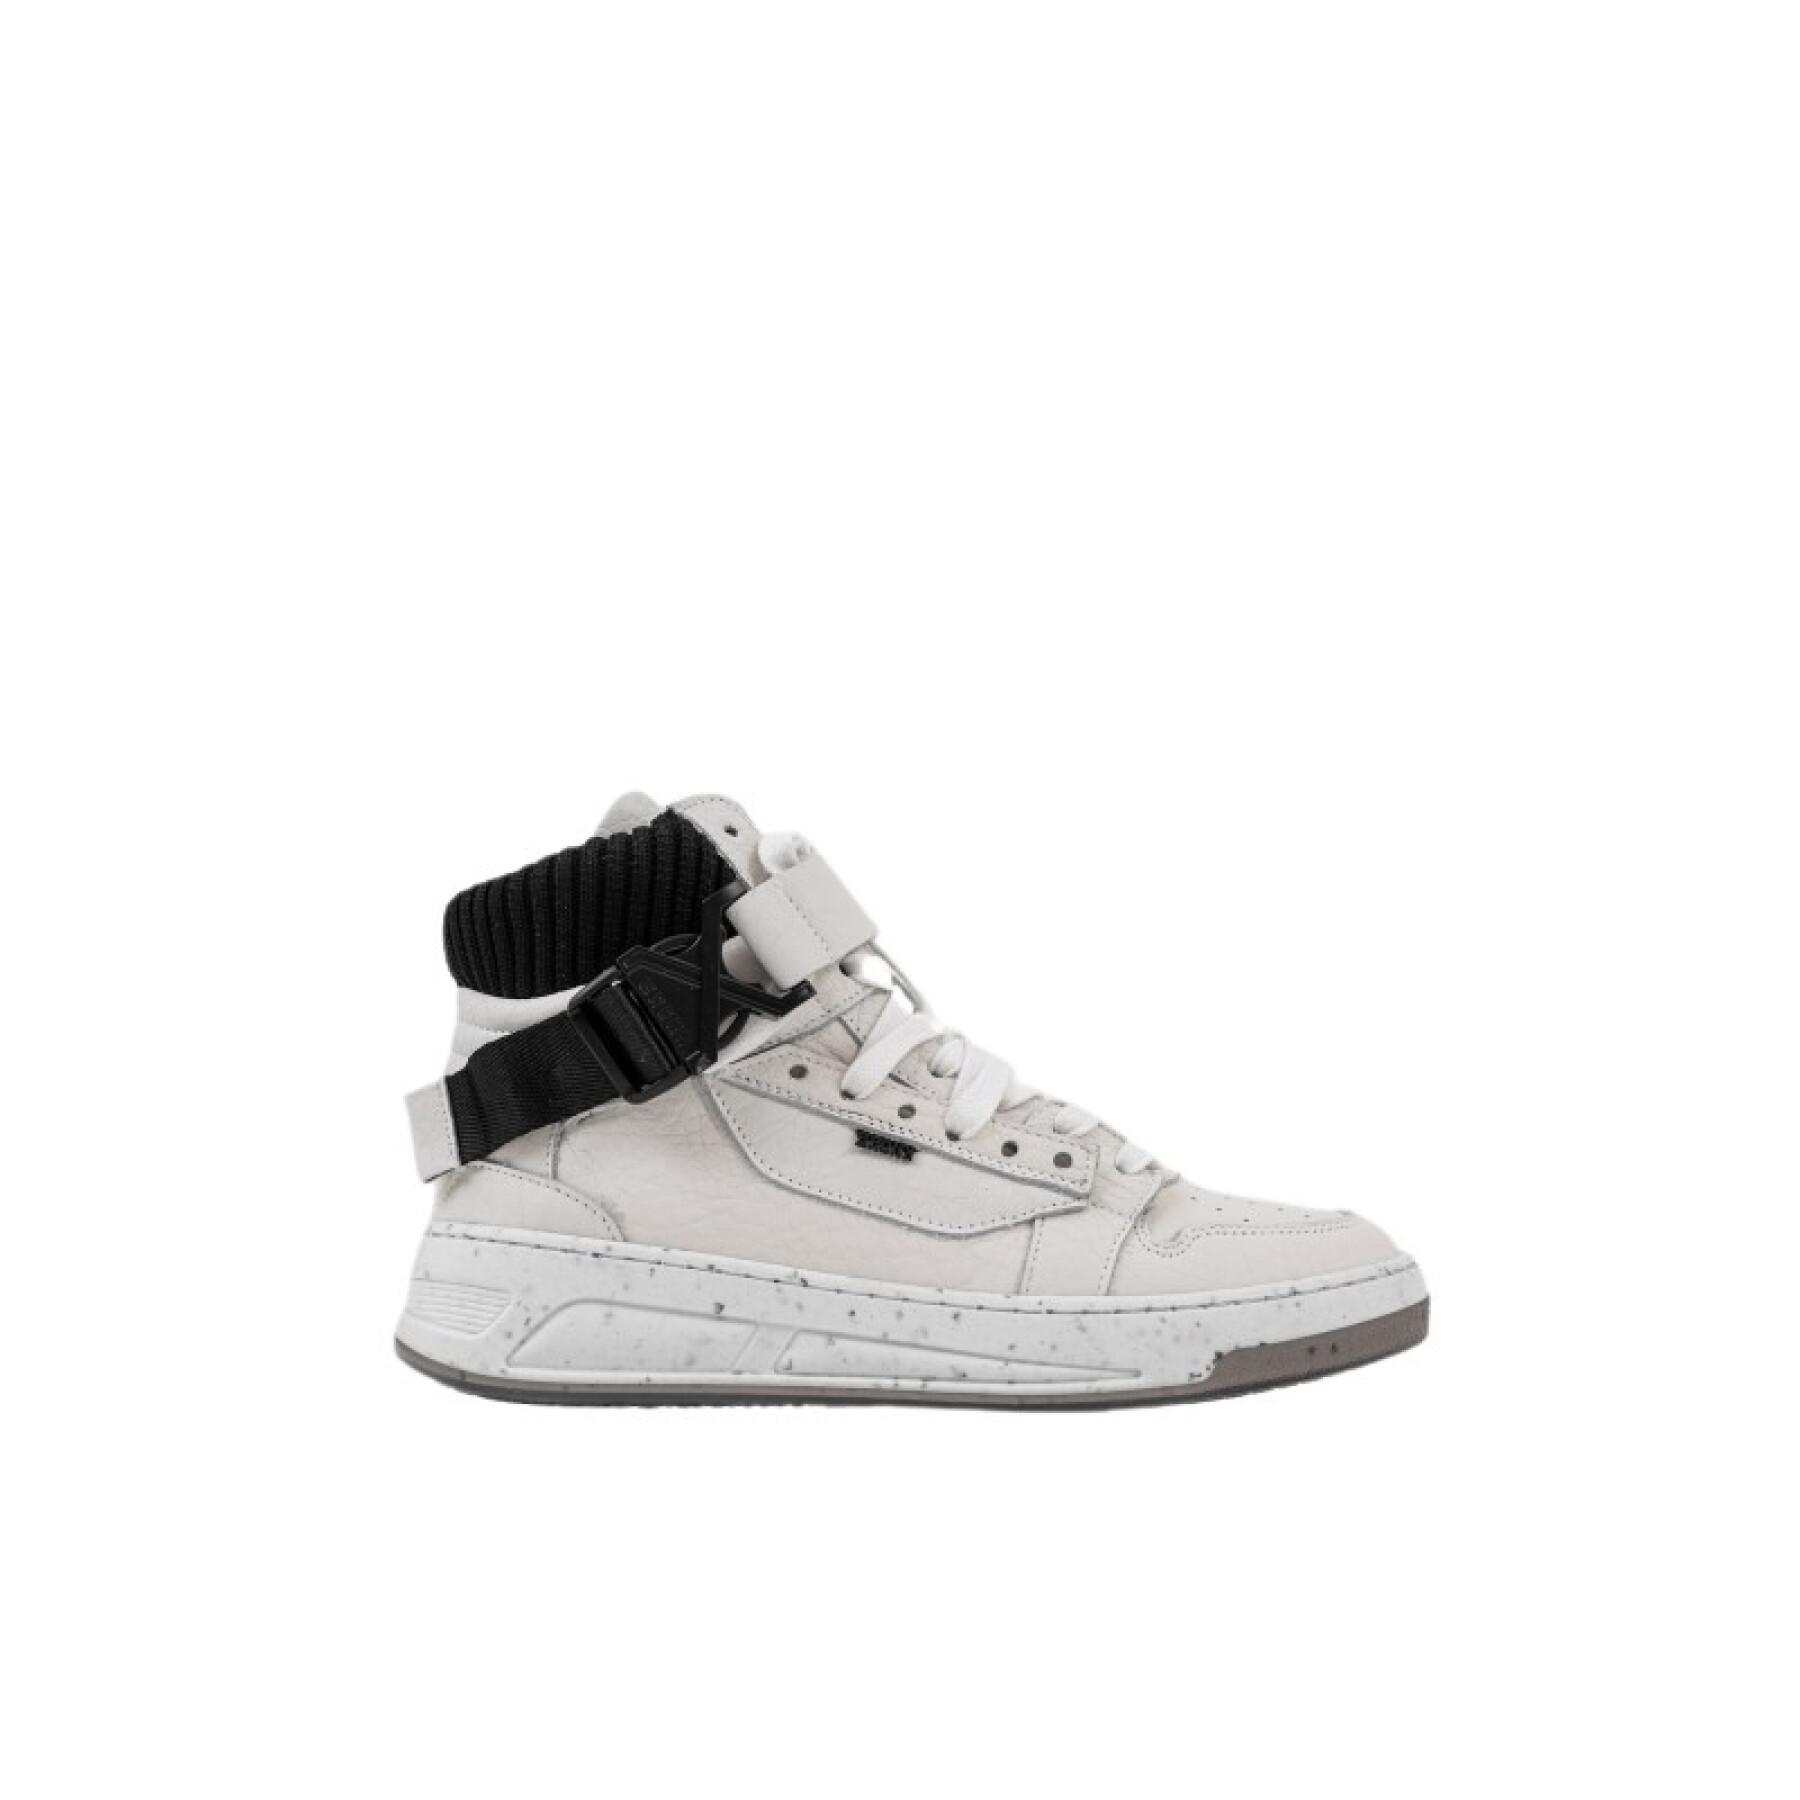 Baskets OLD-COSMO femme Bronx